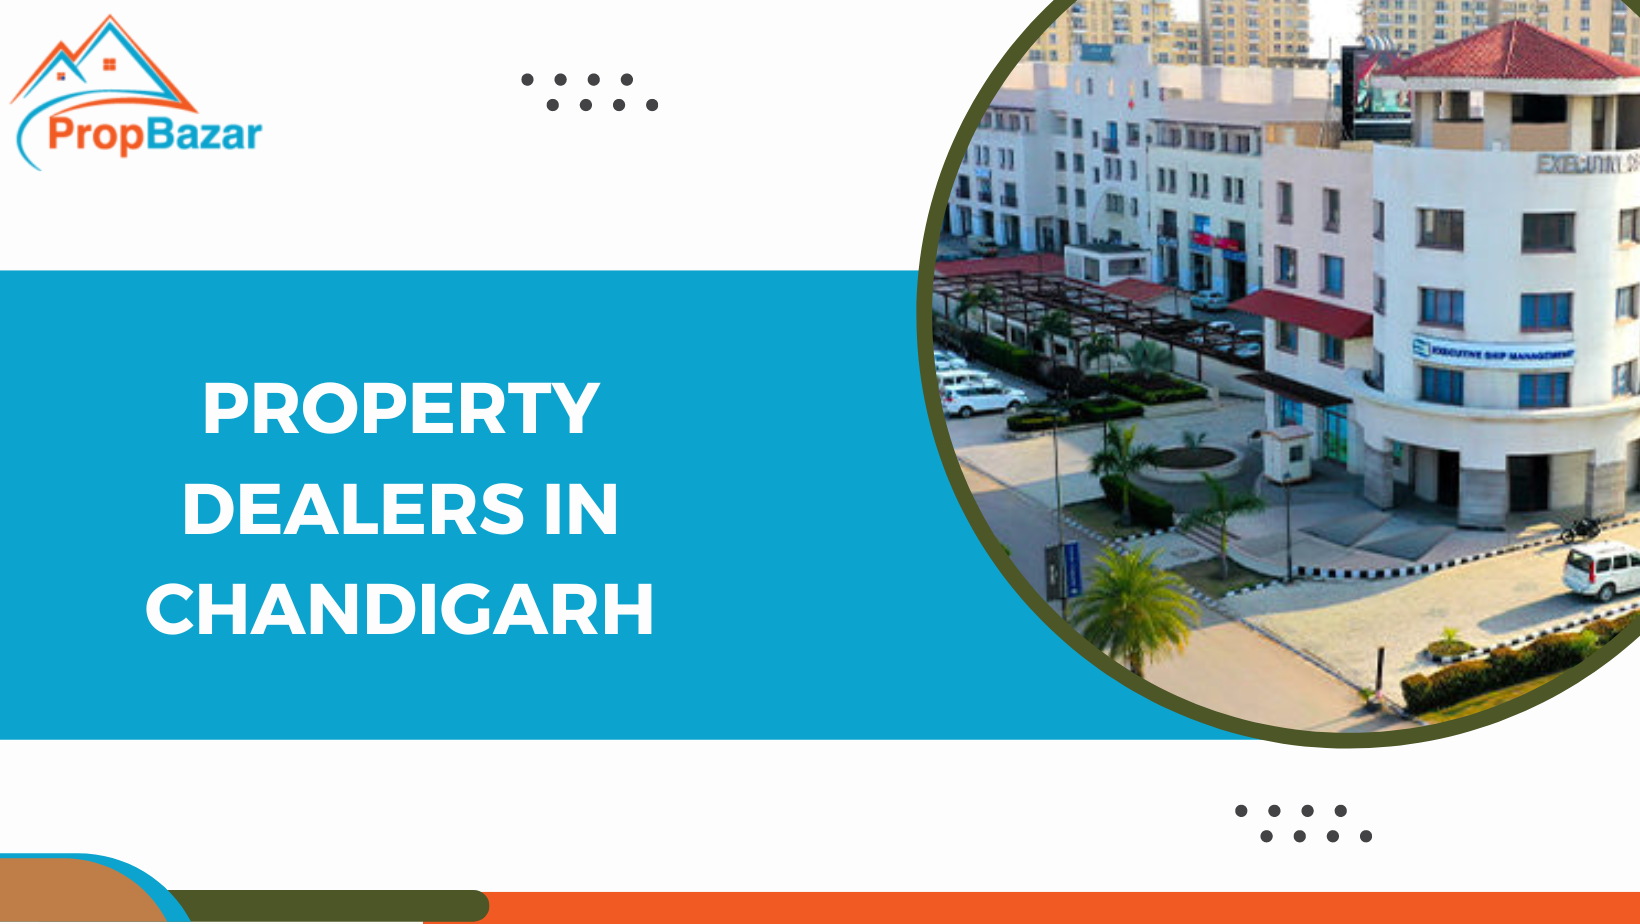 Finding the Perfect Property Dealer in Chandigarh: PropBazar